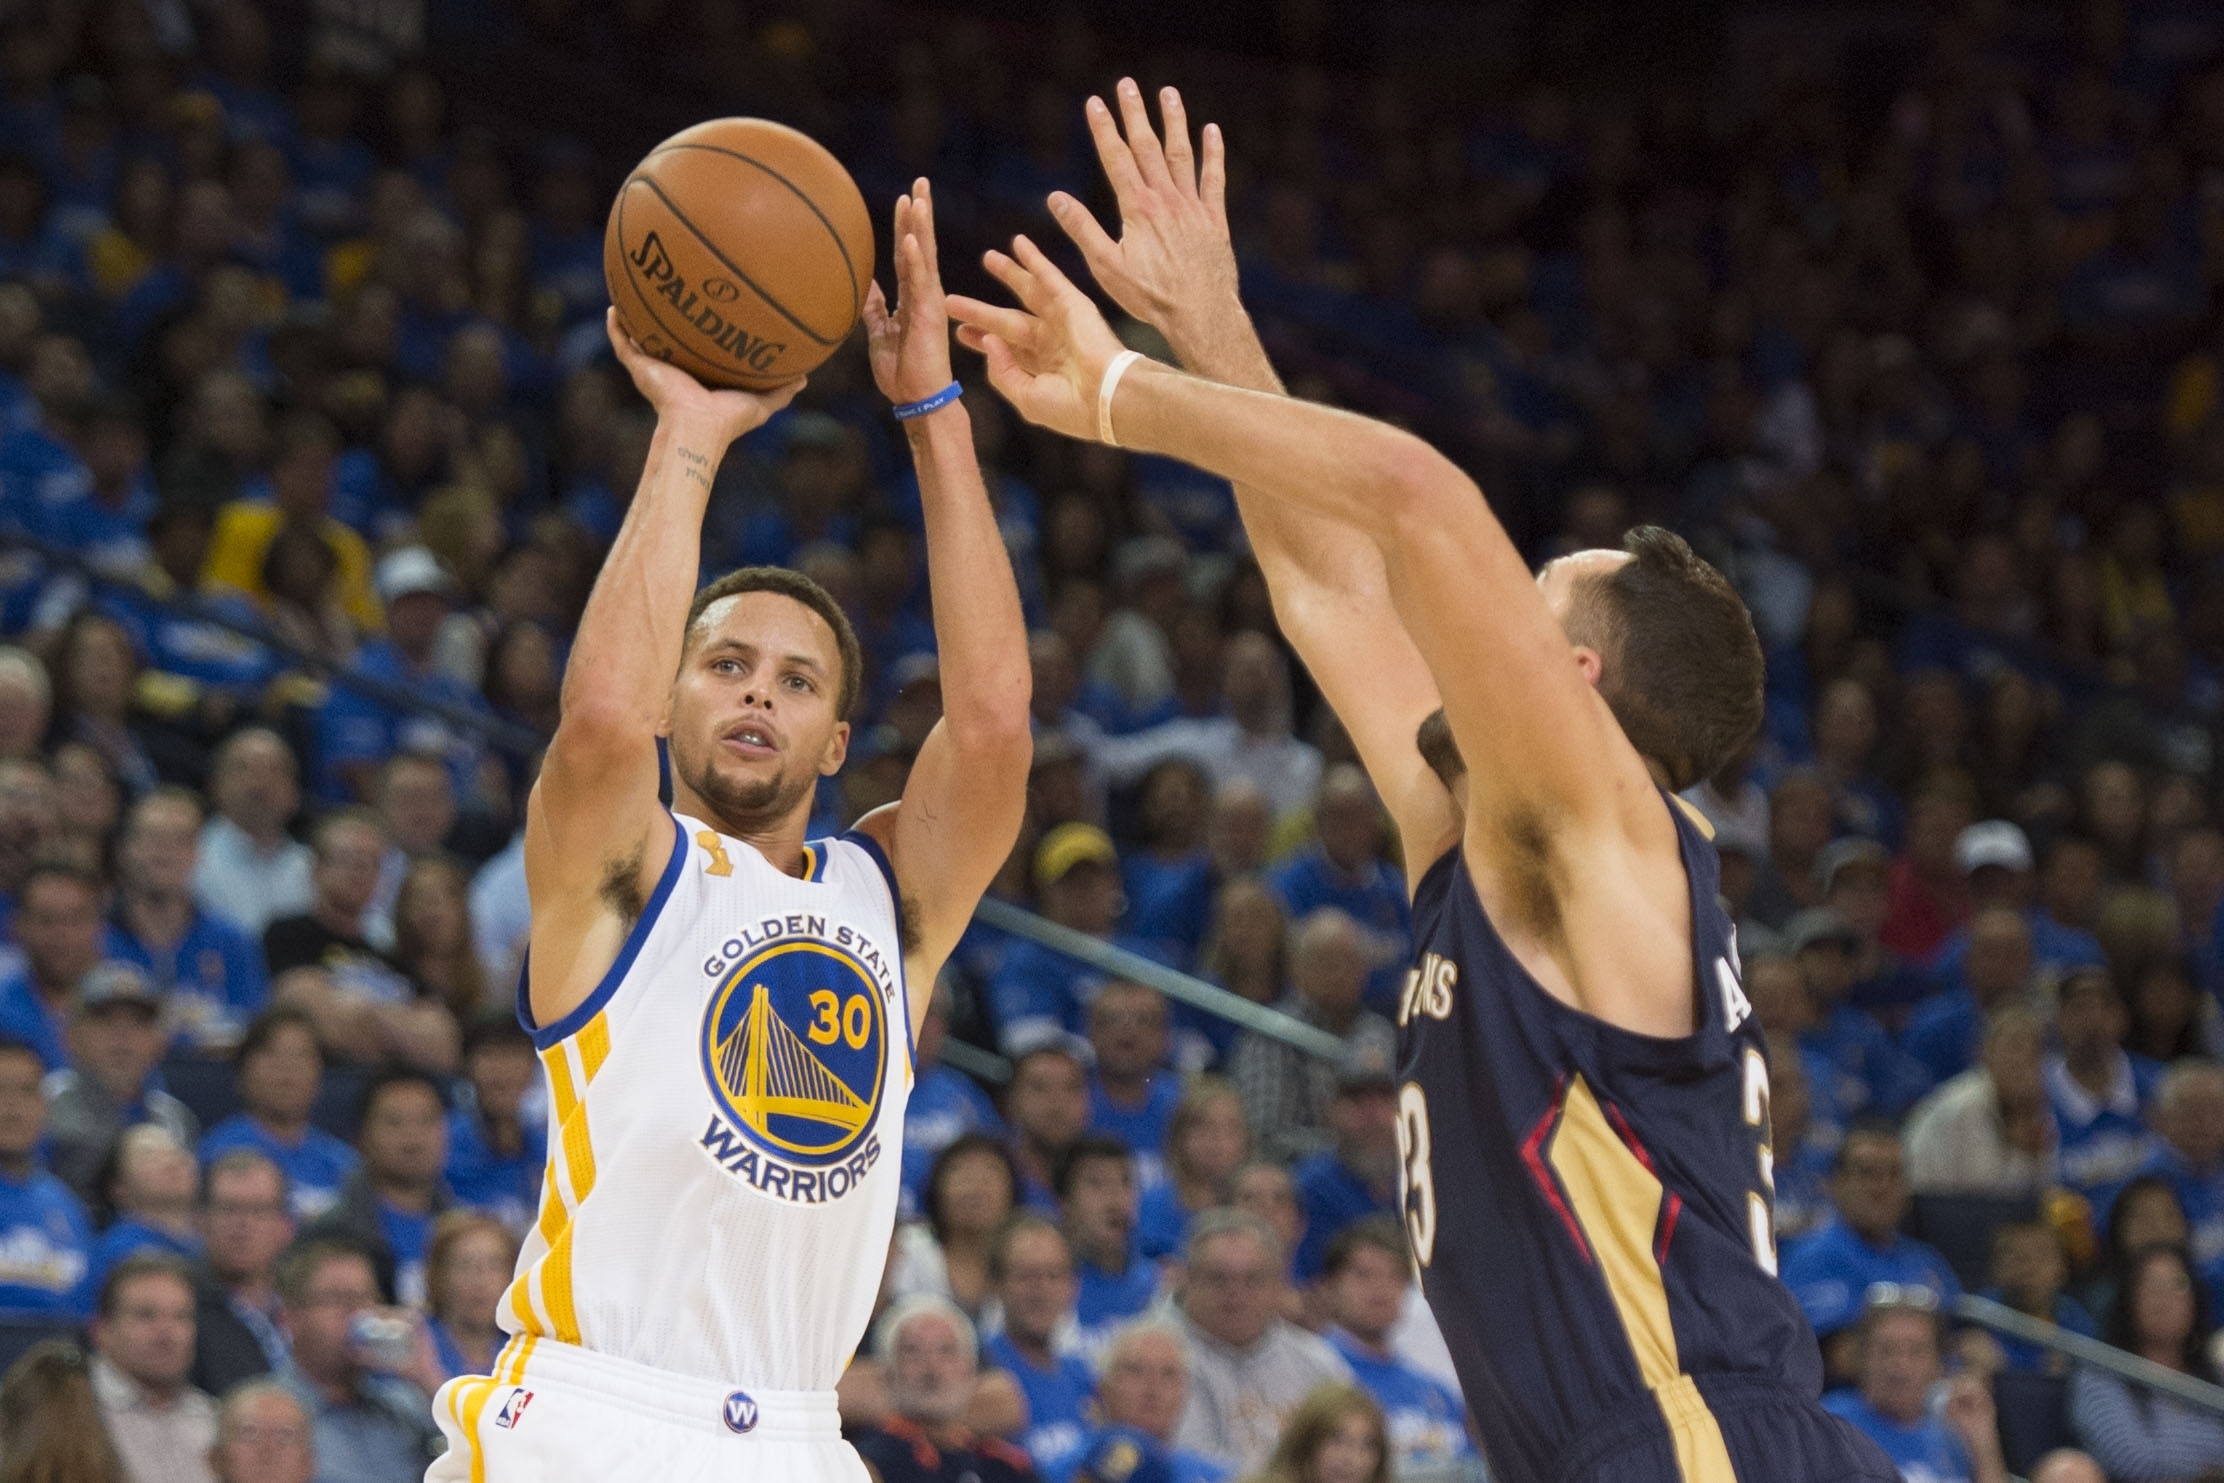 Wardell stephen curry ii is an american professional basketball player for ...